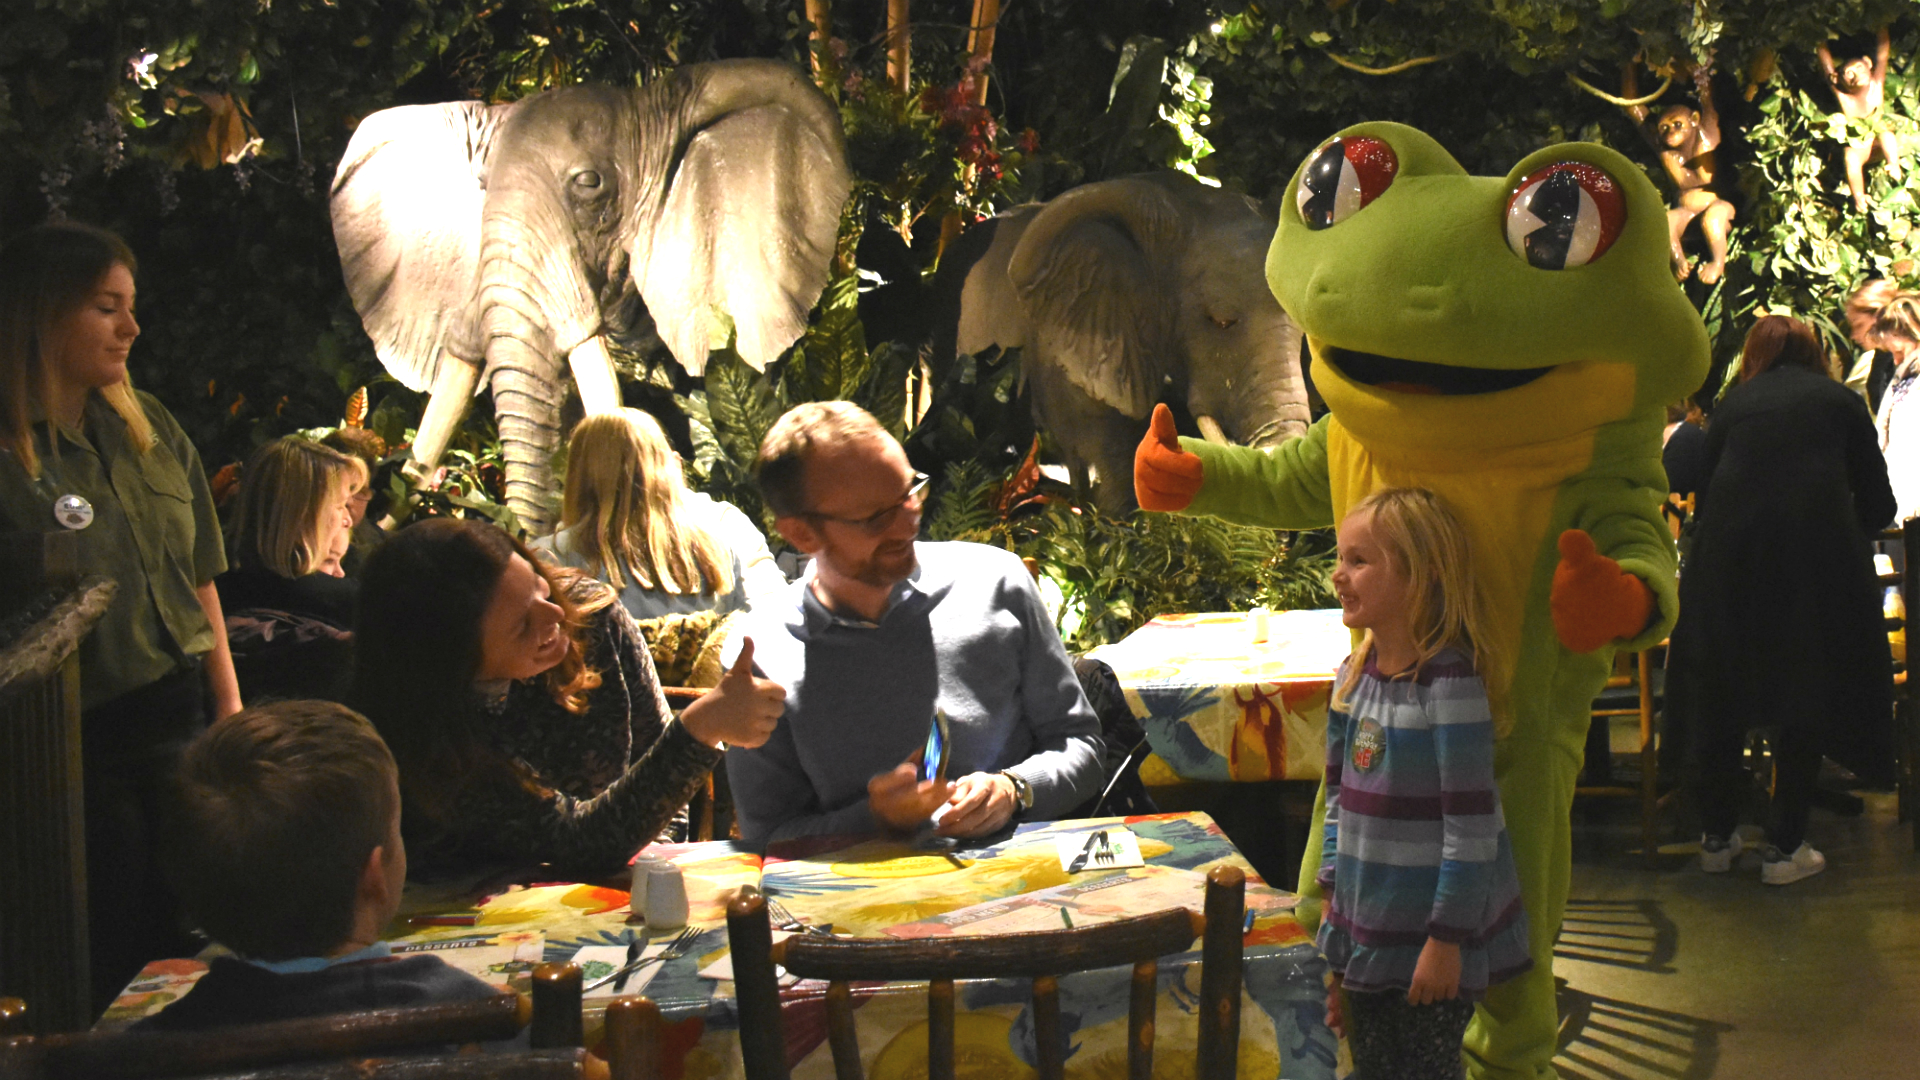 Children's entertainers and rainforest animals at The Rainforest Cafe